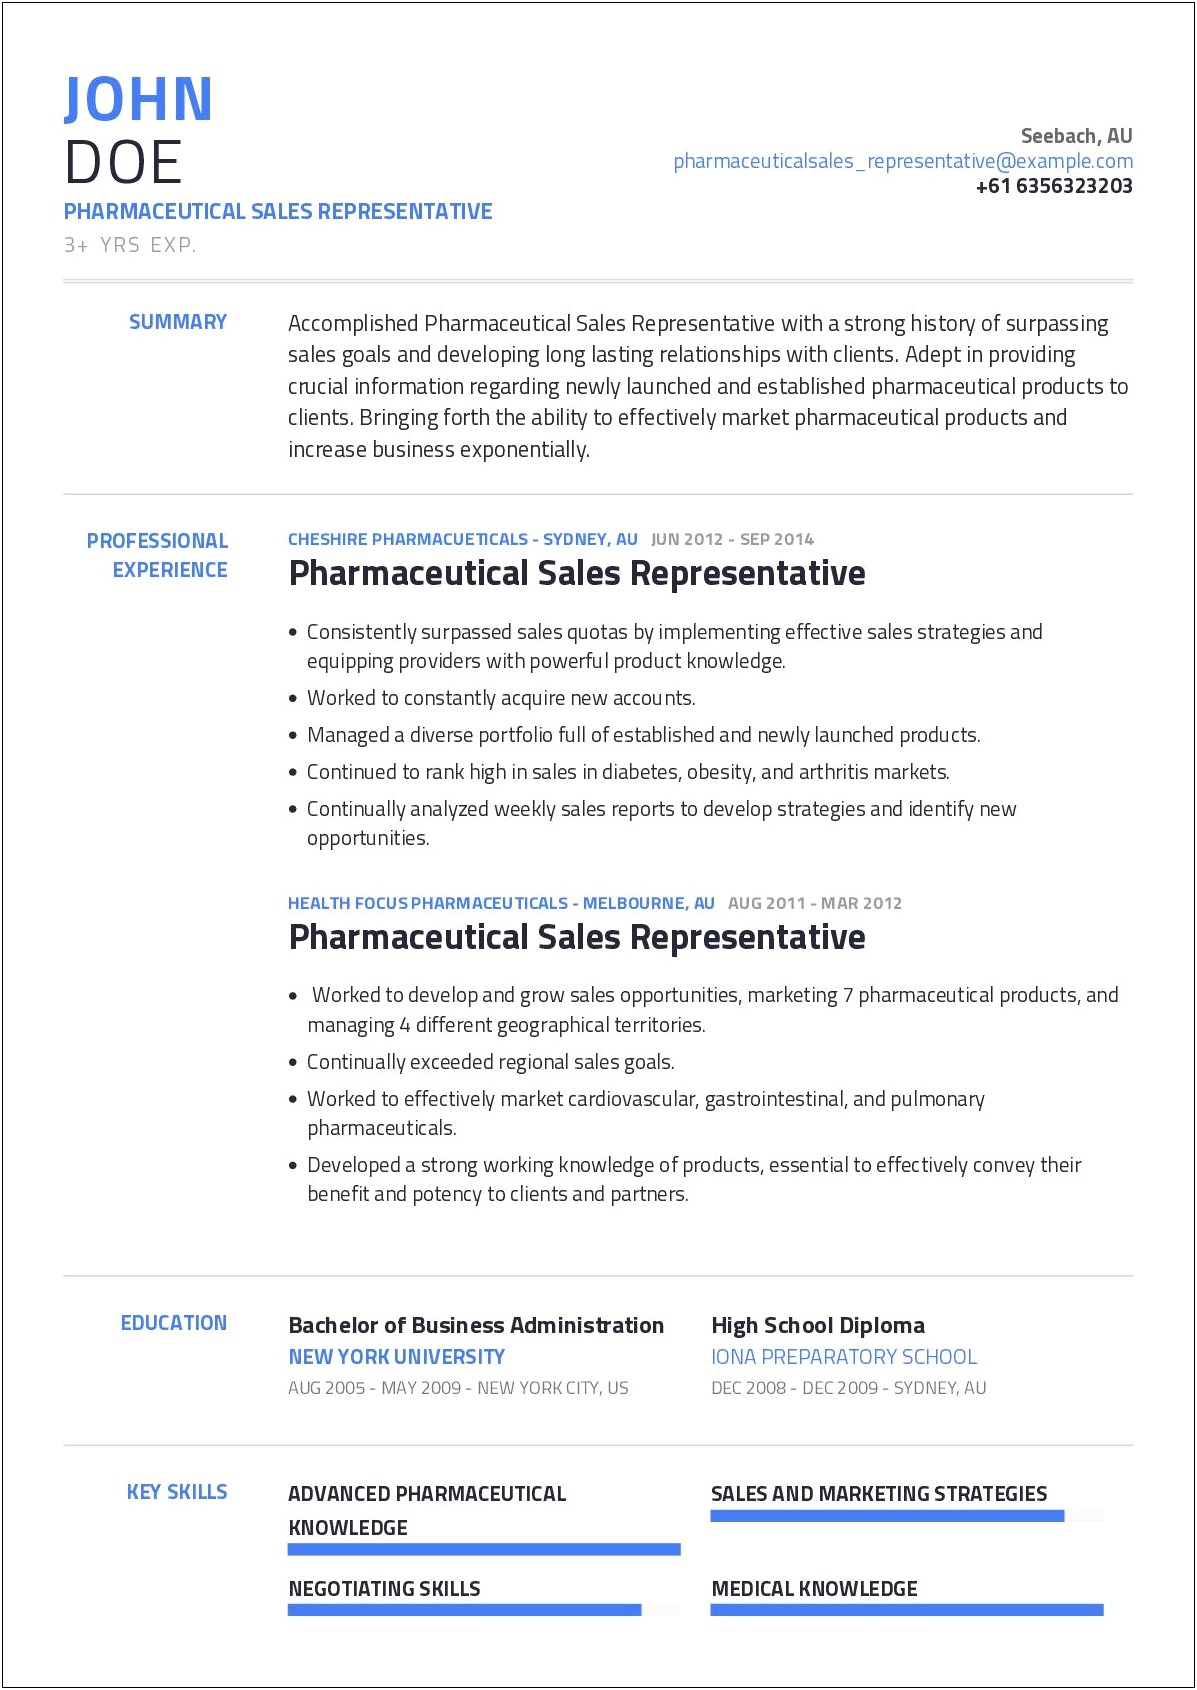 Resume Summary For Pharmaceutical Sales Rep